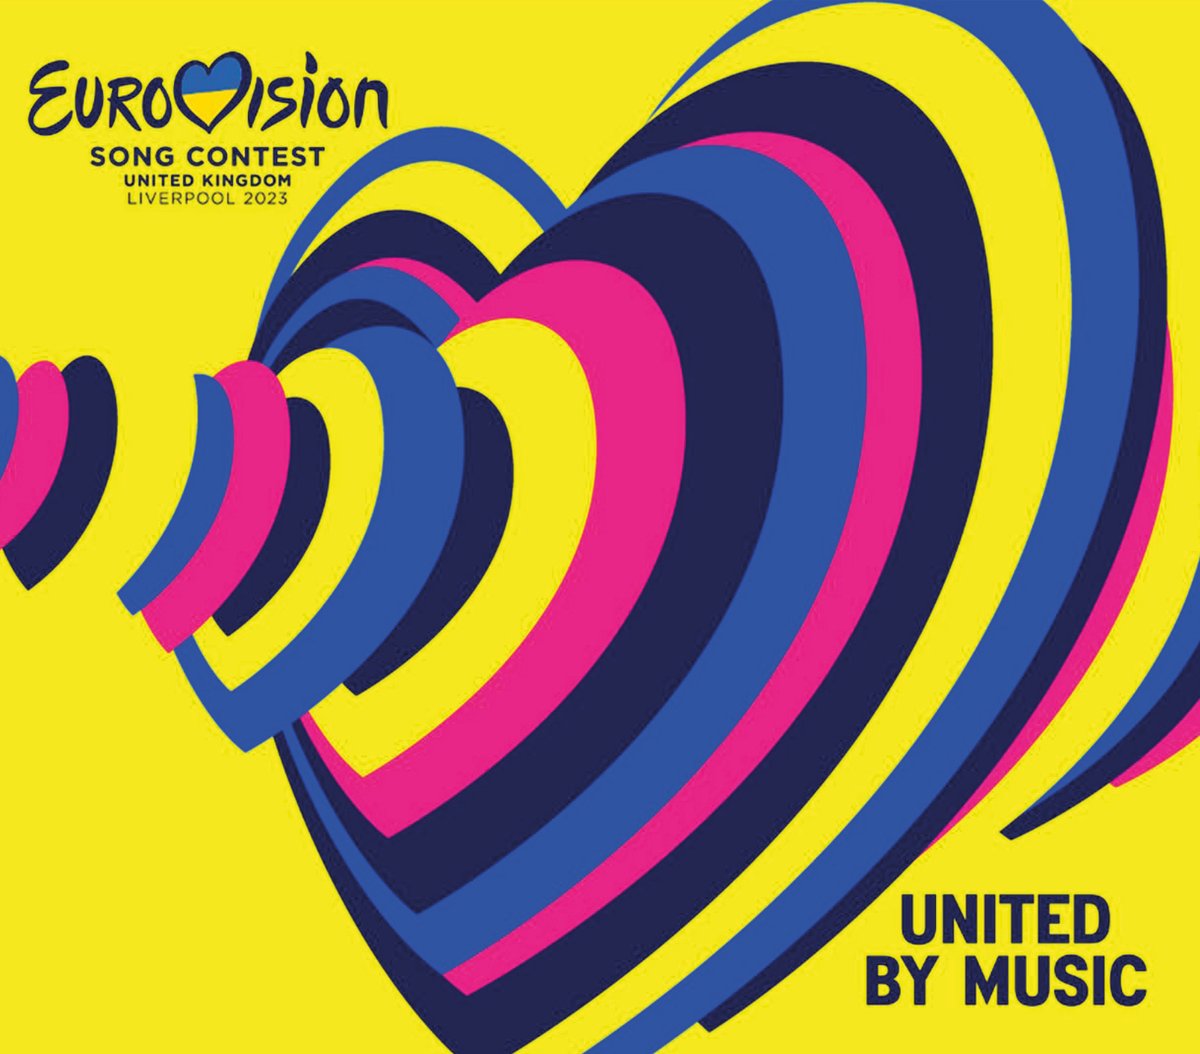 👍 Hot on the heels of the Coronation Bank Holiday celebrations, the #EurovisionSongContest is predicted to supply another welcome boost to the hospitality industry.  

➡️ For more info on how Zonal's hospitality tech can help you: zonal.co.uk

#ZonalUK #EventBooking